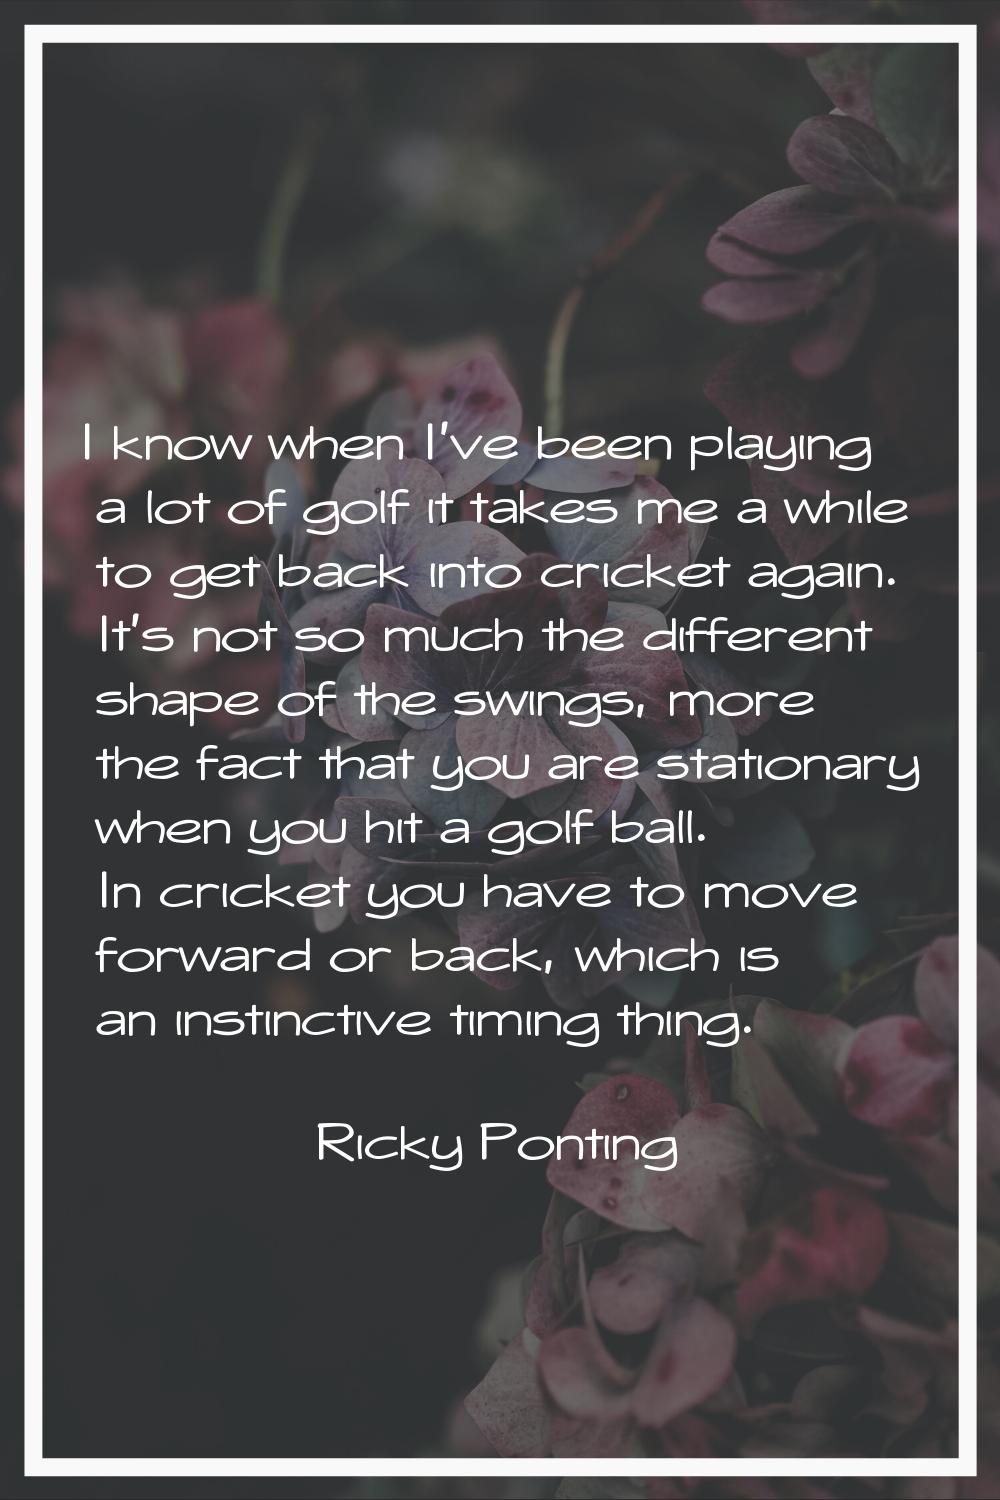 I know when I've been playing a lot of golf it takes me a while to get back into cricket again. It'